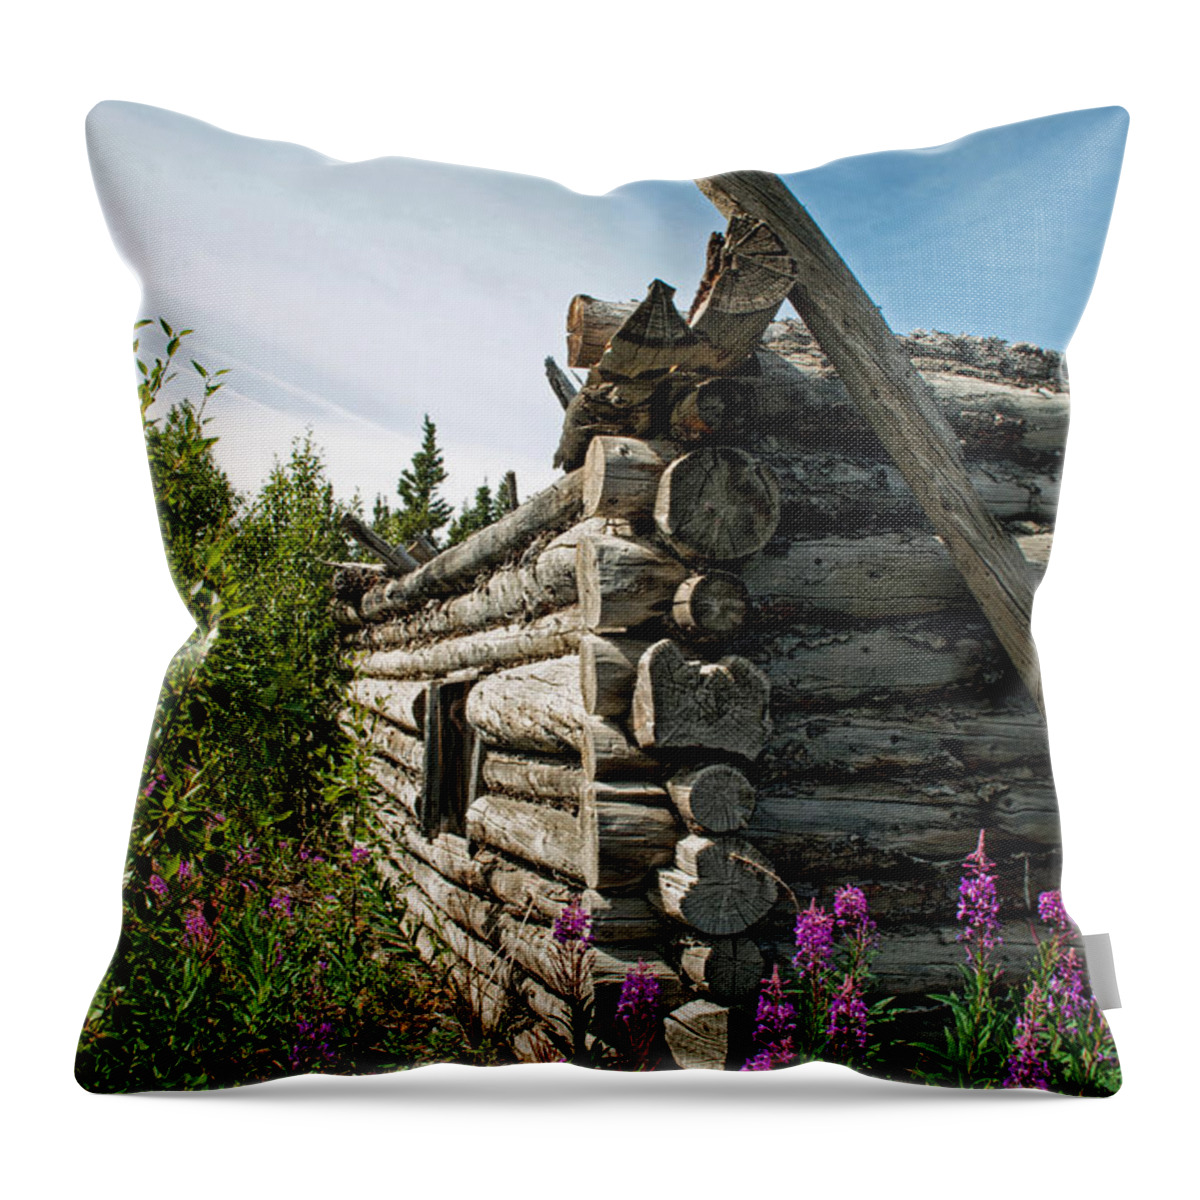 State Of Disrepair Throw Pillow featuring the photograph Log Construction by Cathy Mahnke